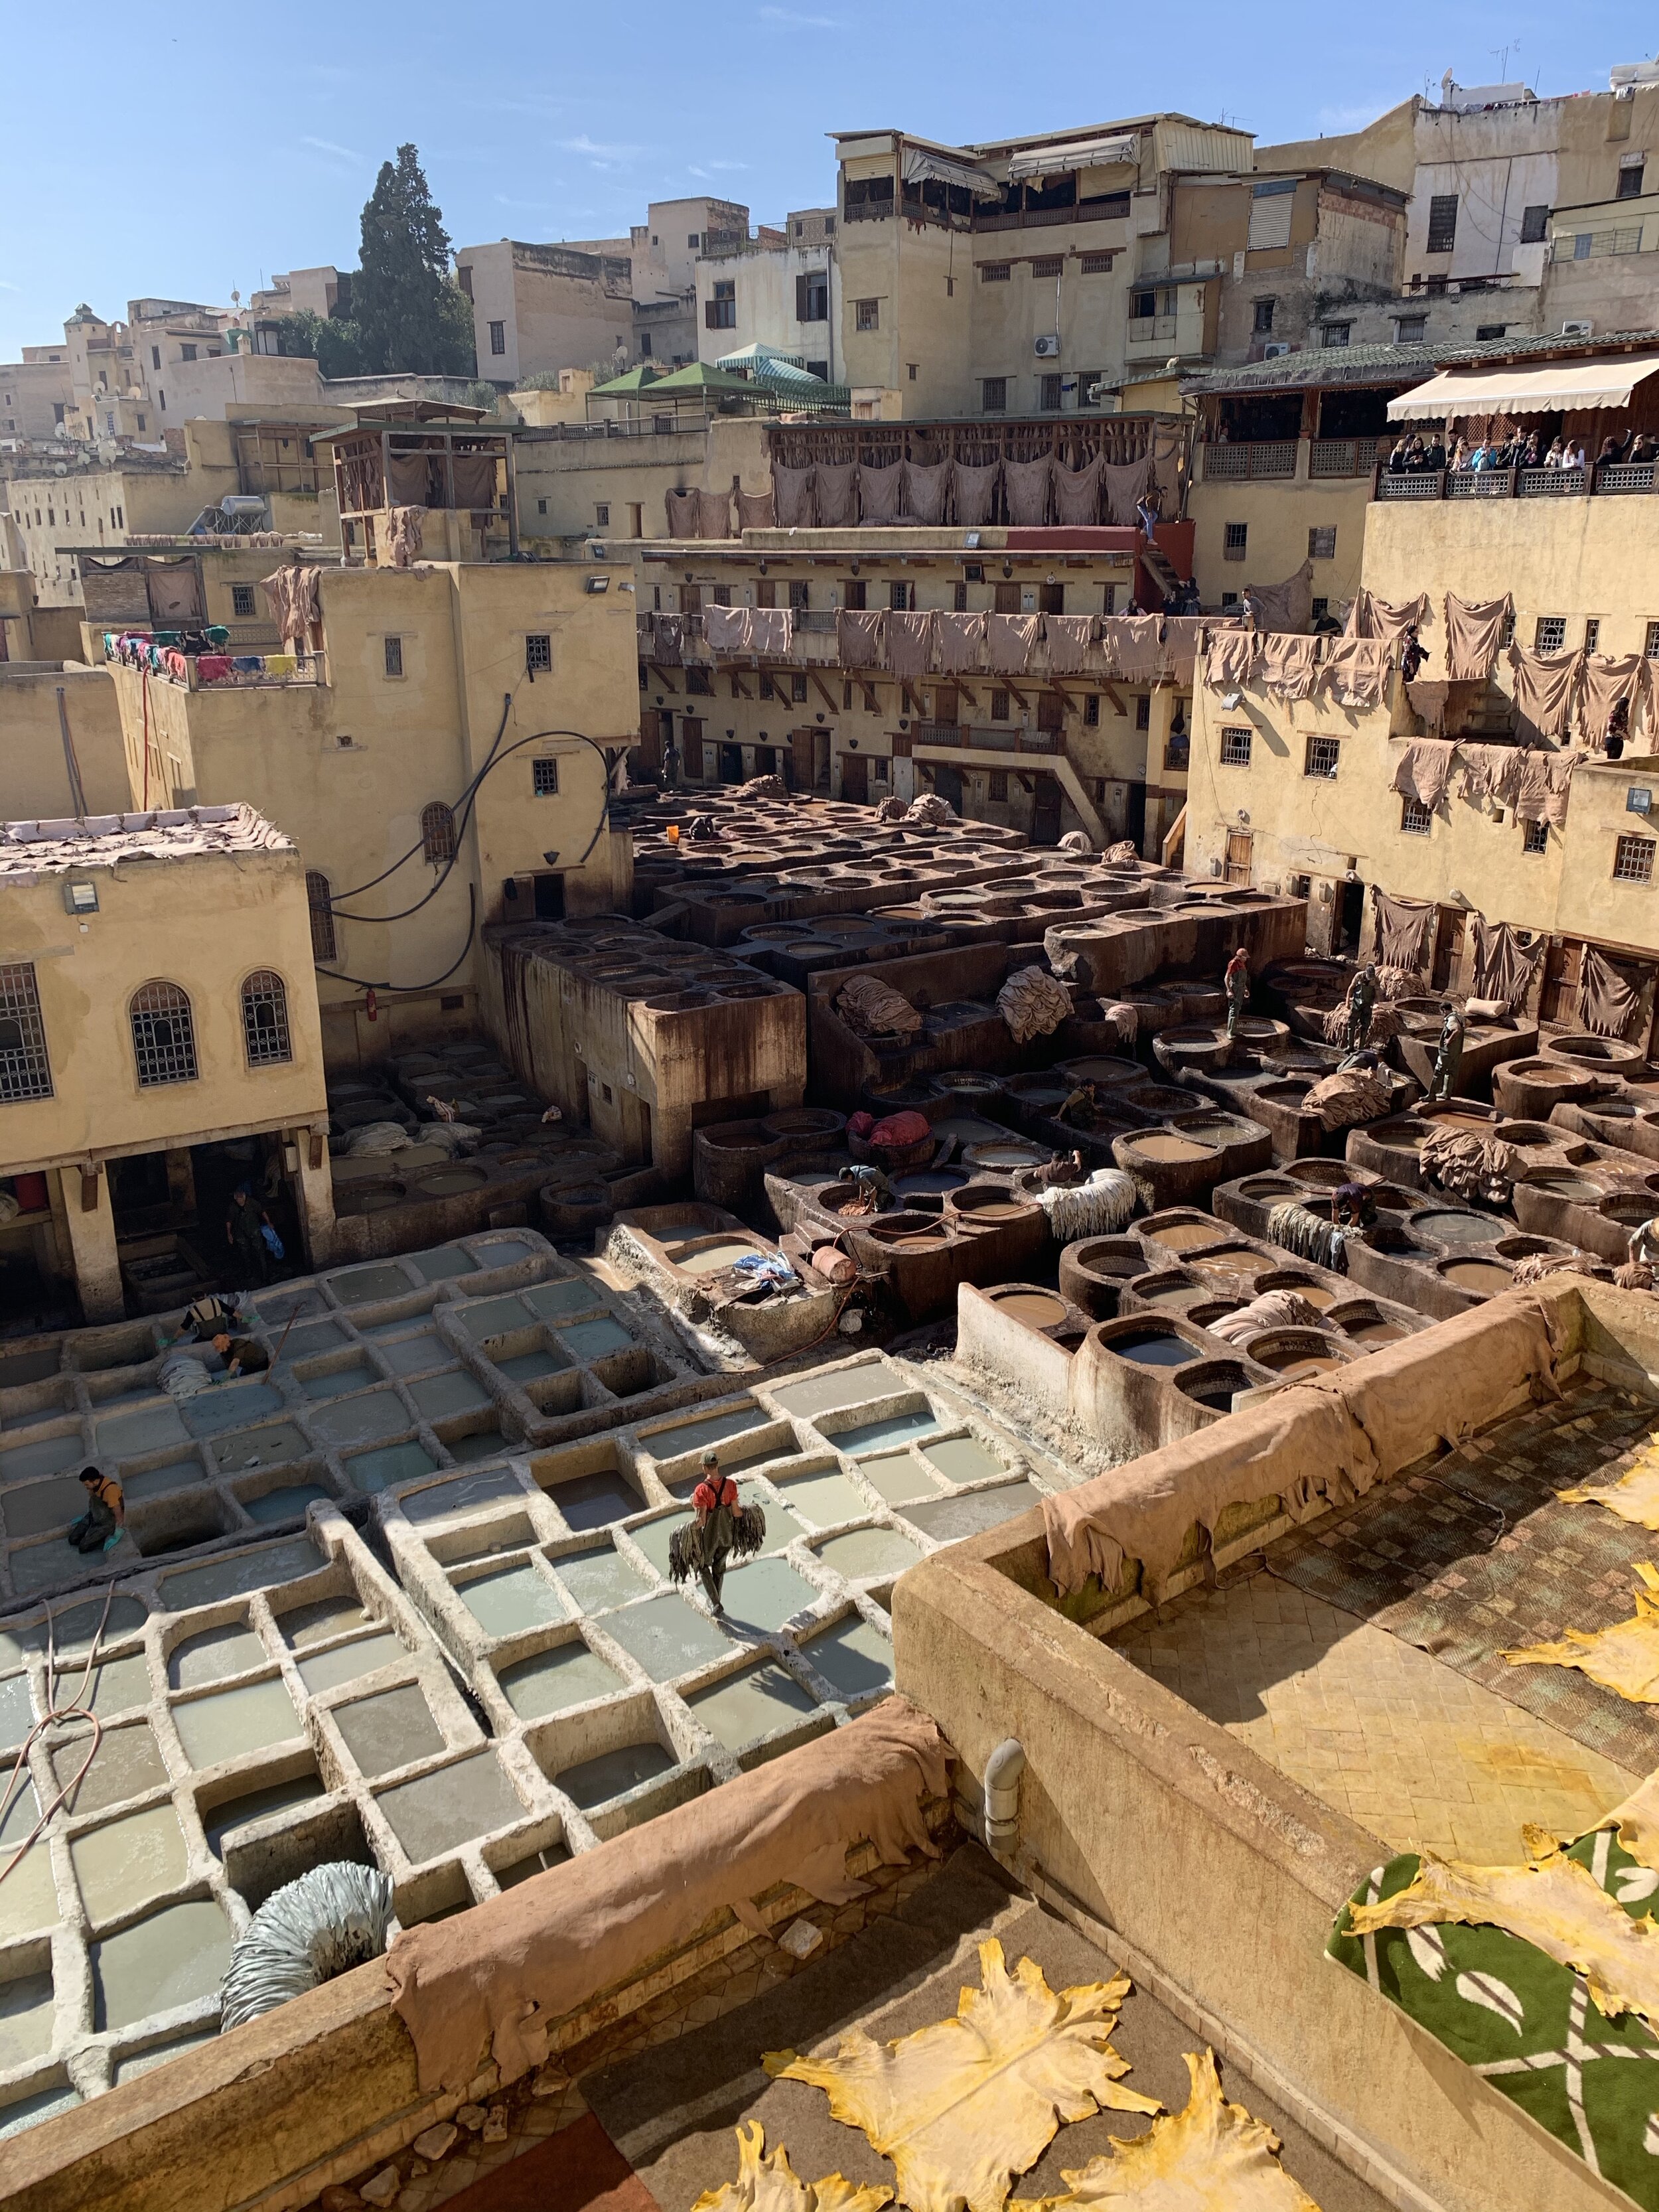 The first of many shots from the Chouara Tanneries terrace. It smells far worse than it looks. That's why they give everyone sprigs of mint to put between your lips and nose - a "gas mask"